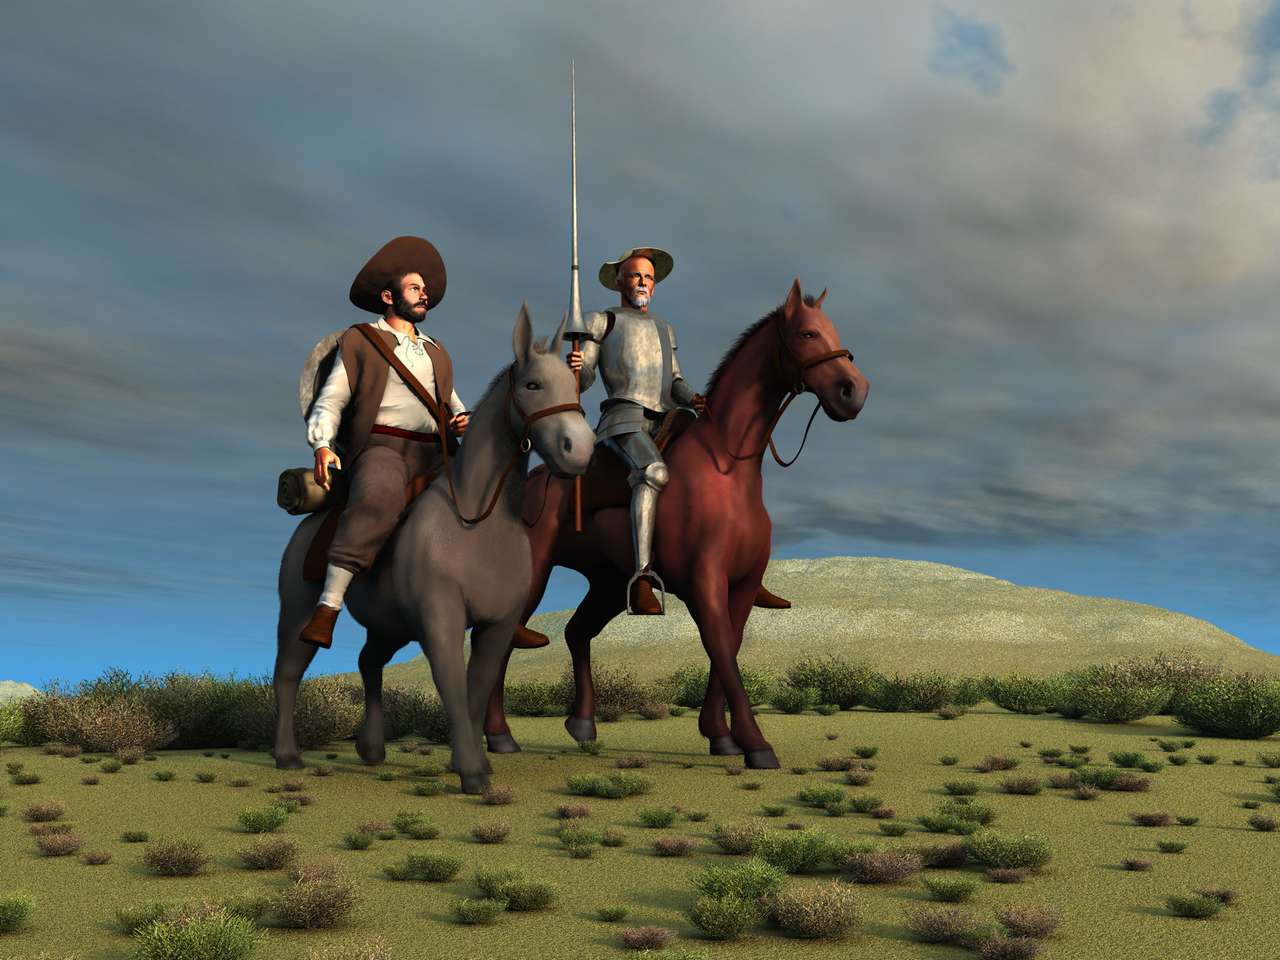 Men on horses puzzle online from photo